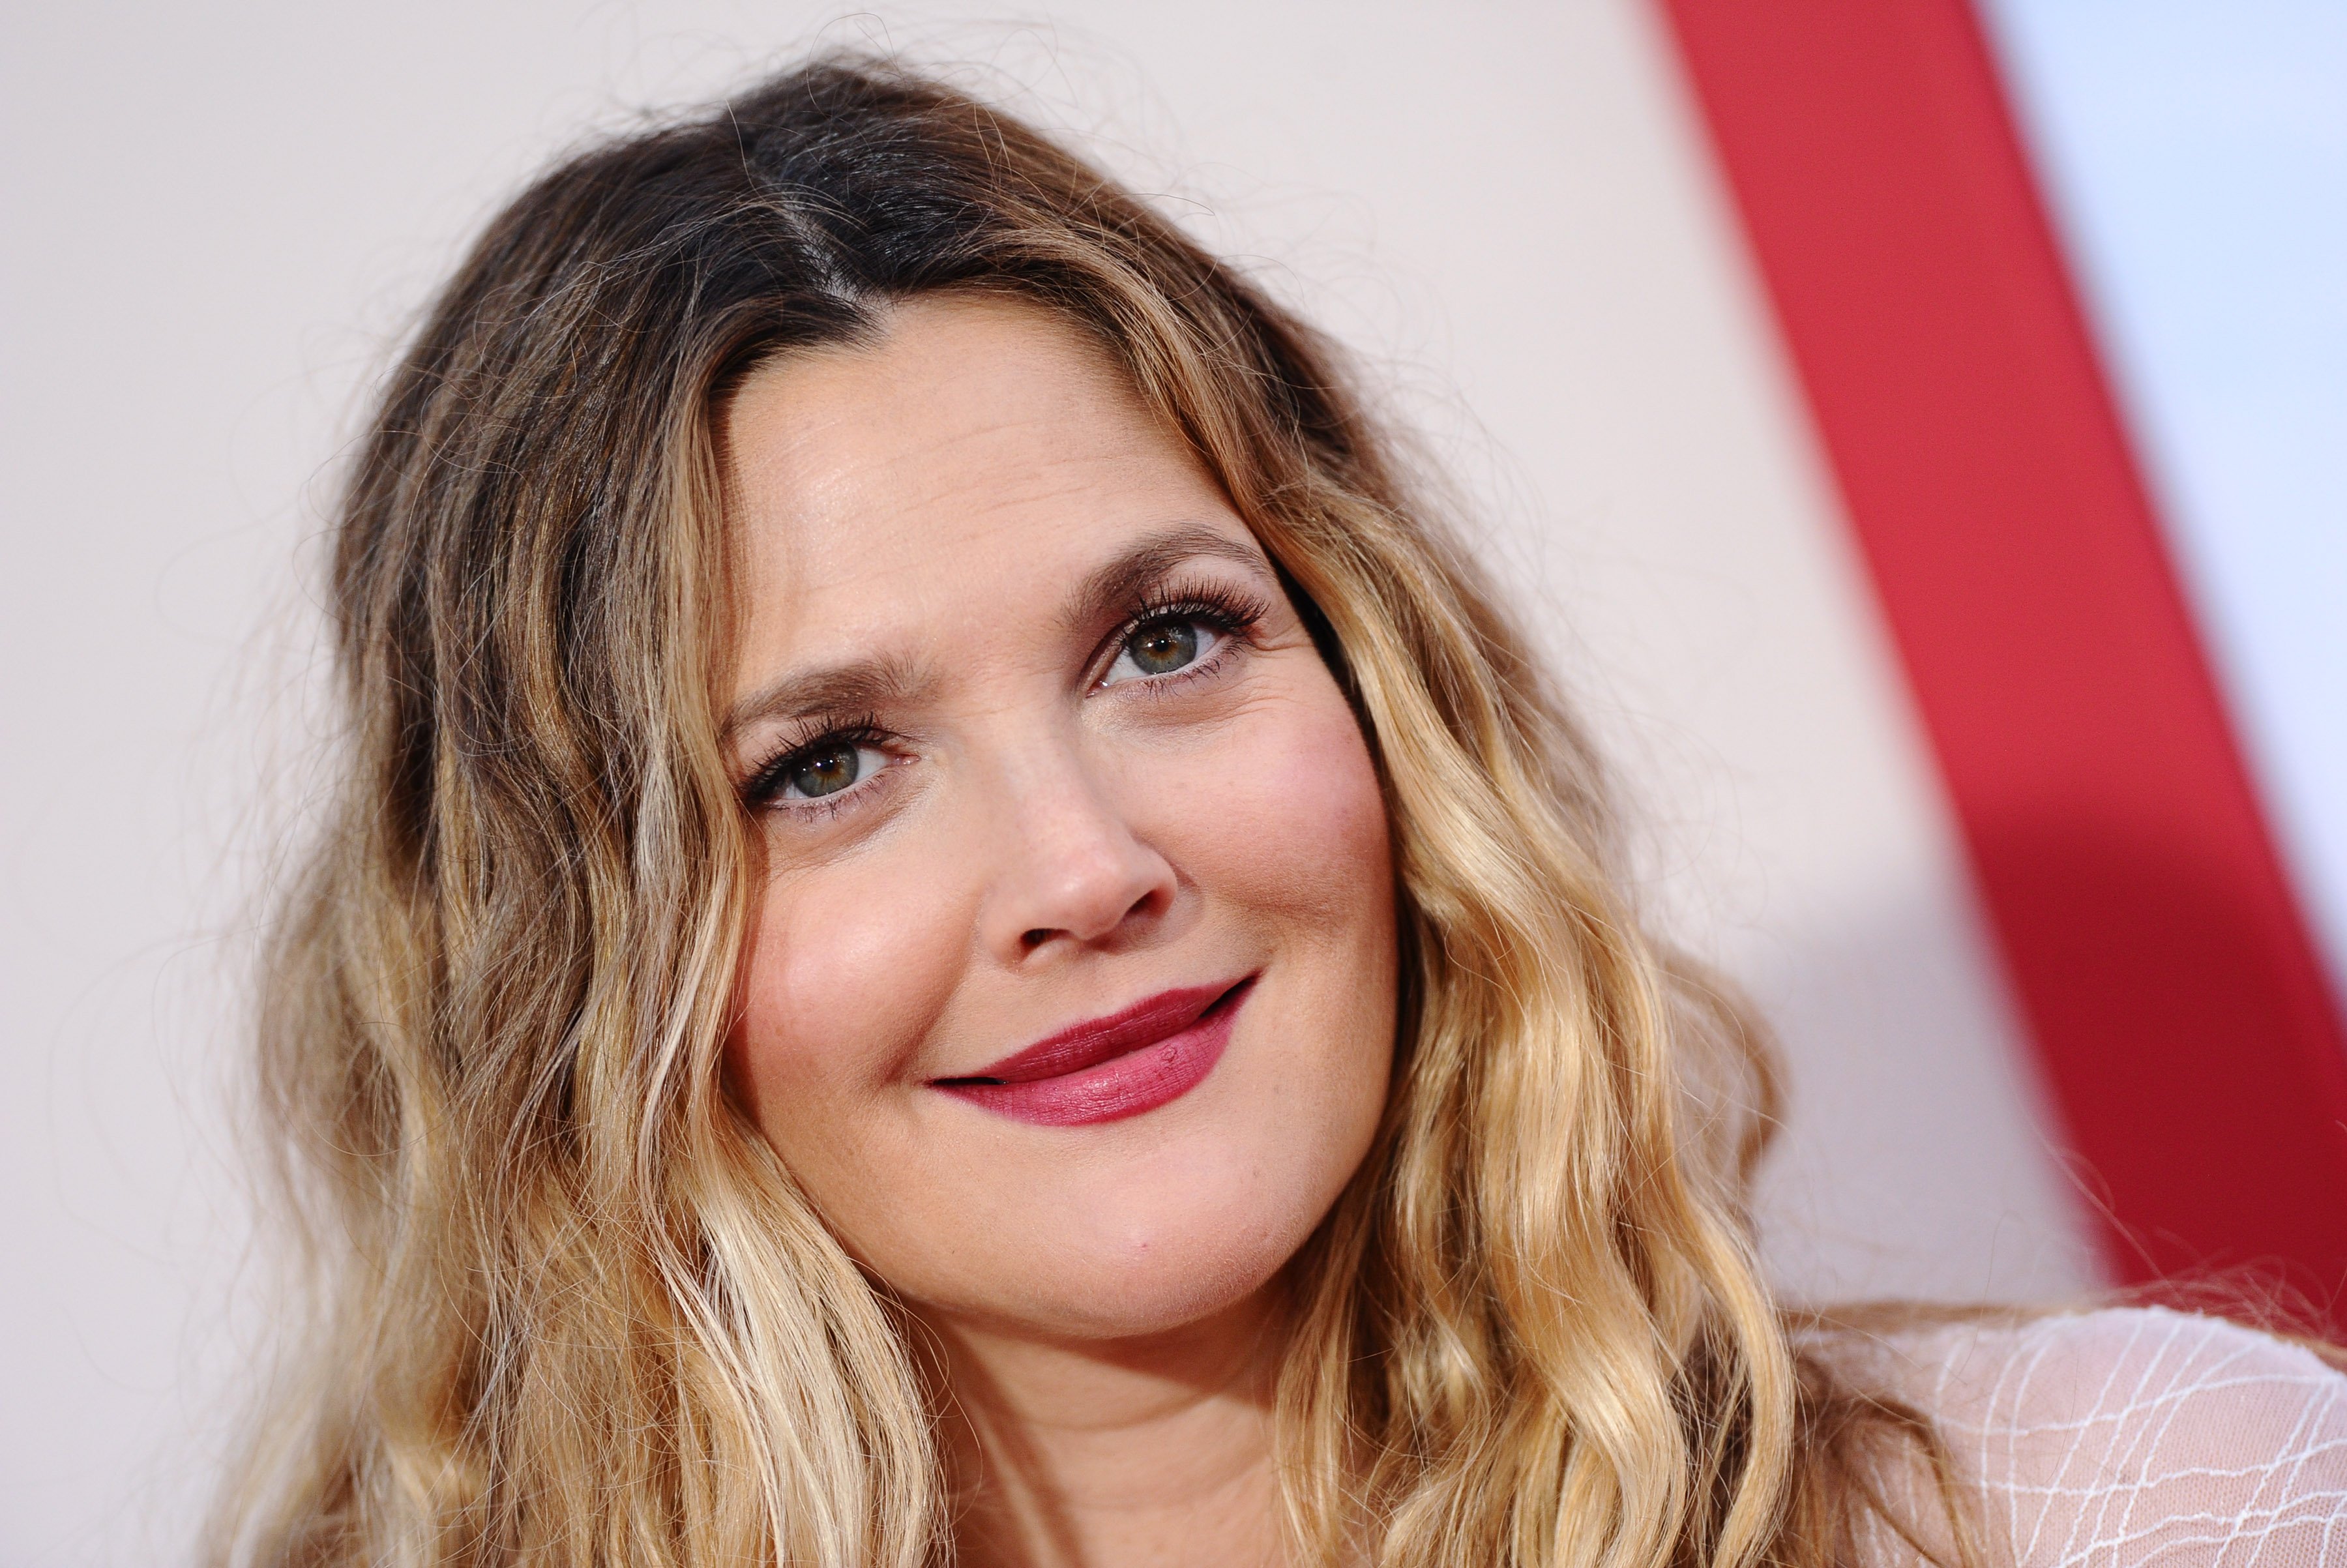 Drew Barrymore arrives at the Los Angeles premiere of 'Blended' at TCL Chinese Theatre on May 21, 2014 in Hollywood, California | Source: Getty Images